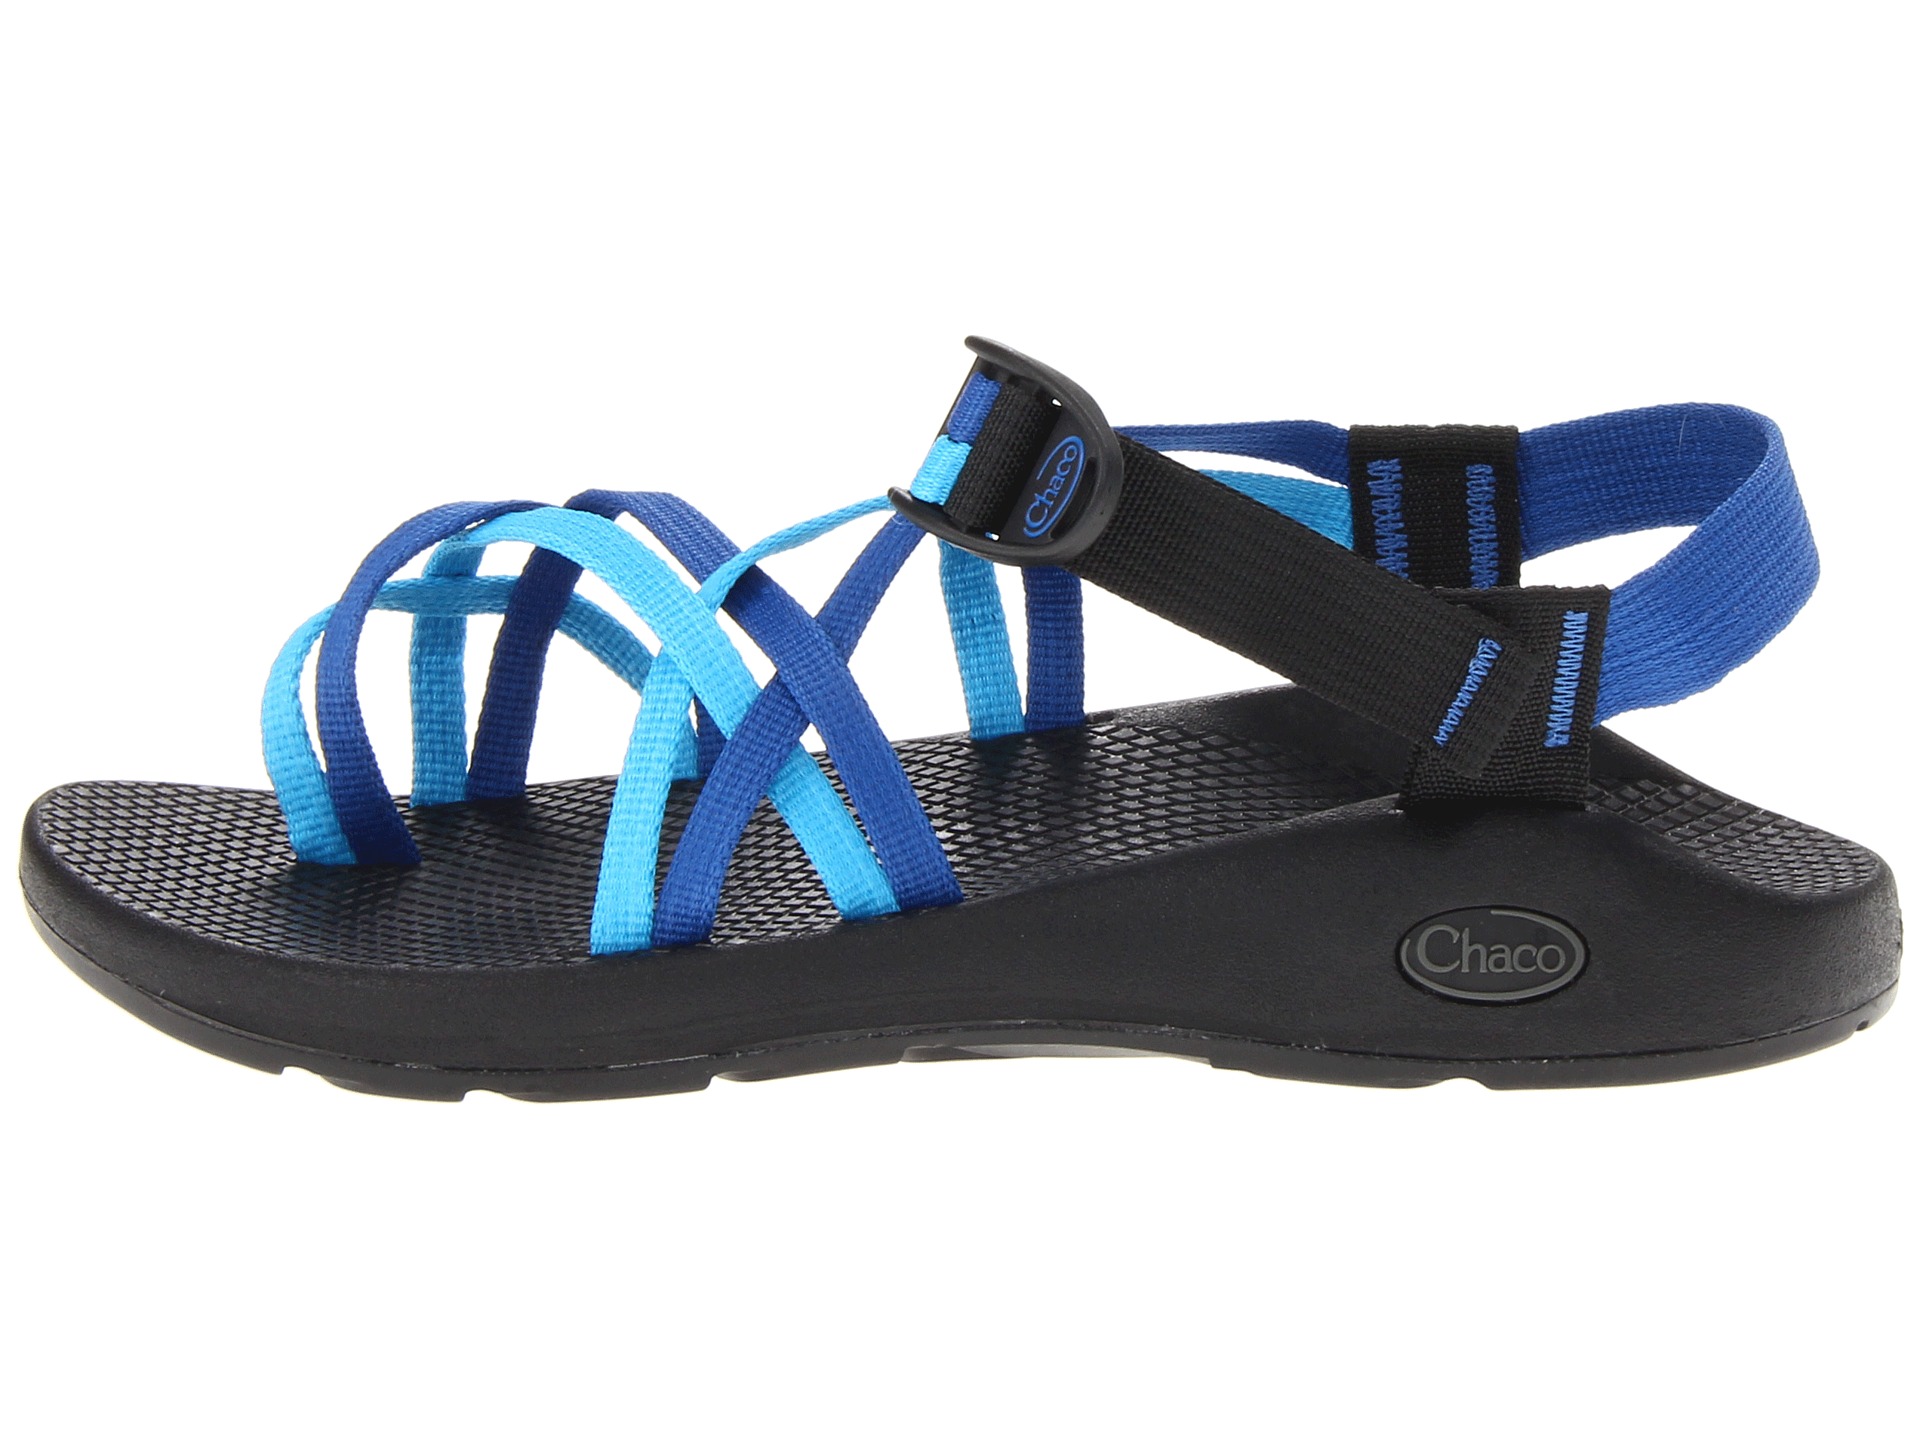 Chaco Zx 2 Yampa Blue, Shoes | Shipped Free at Zappos